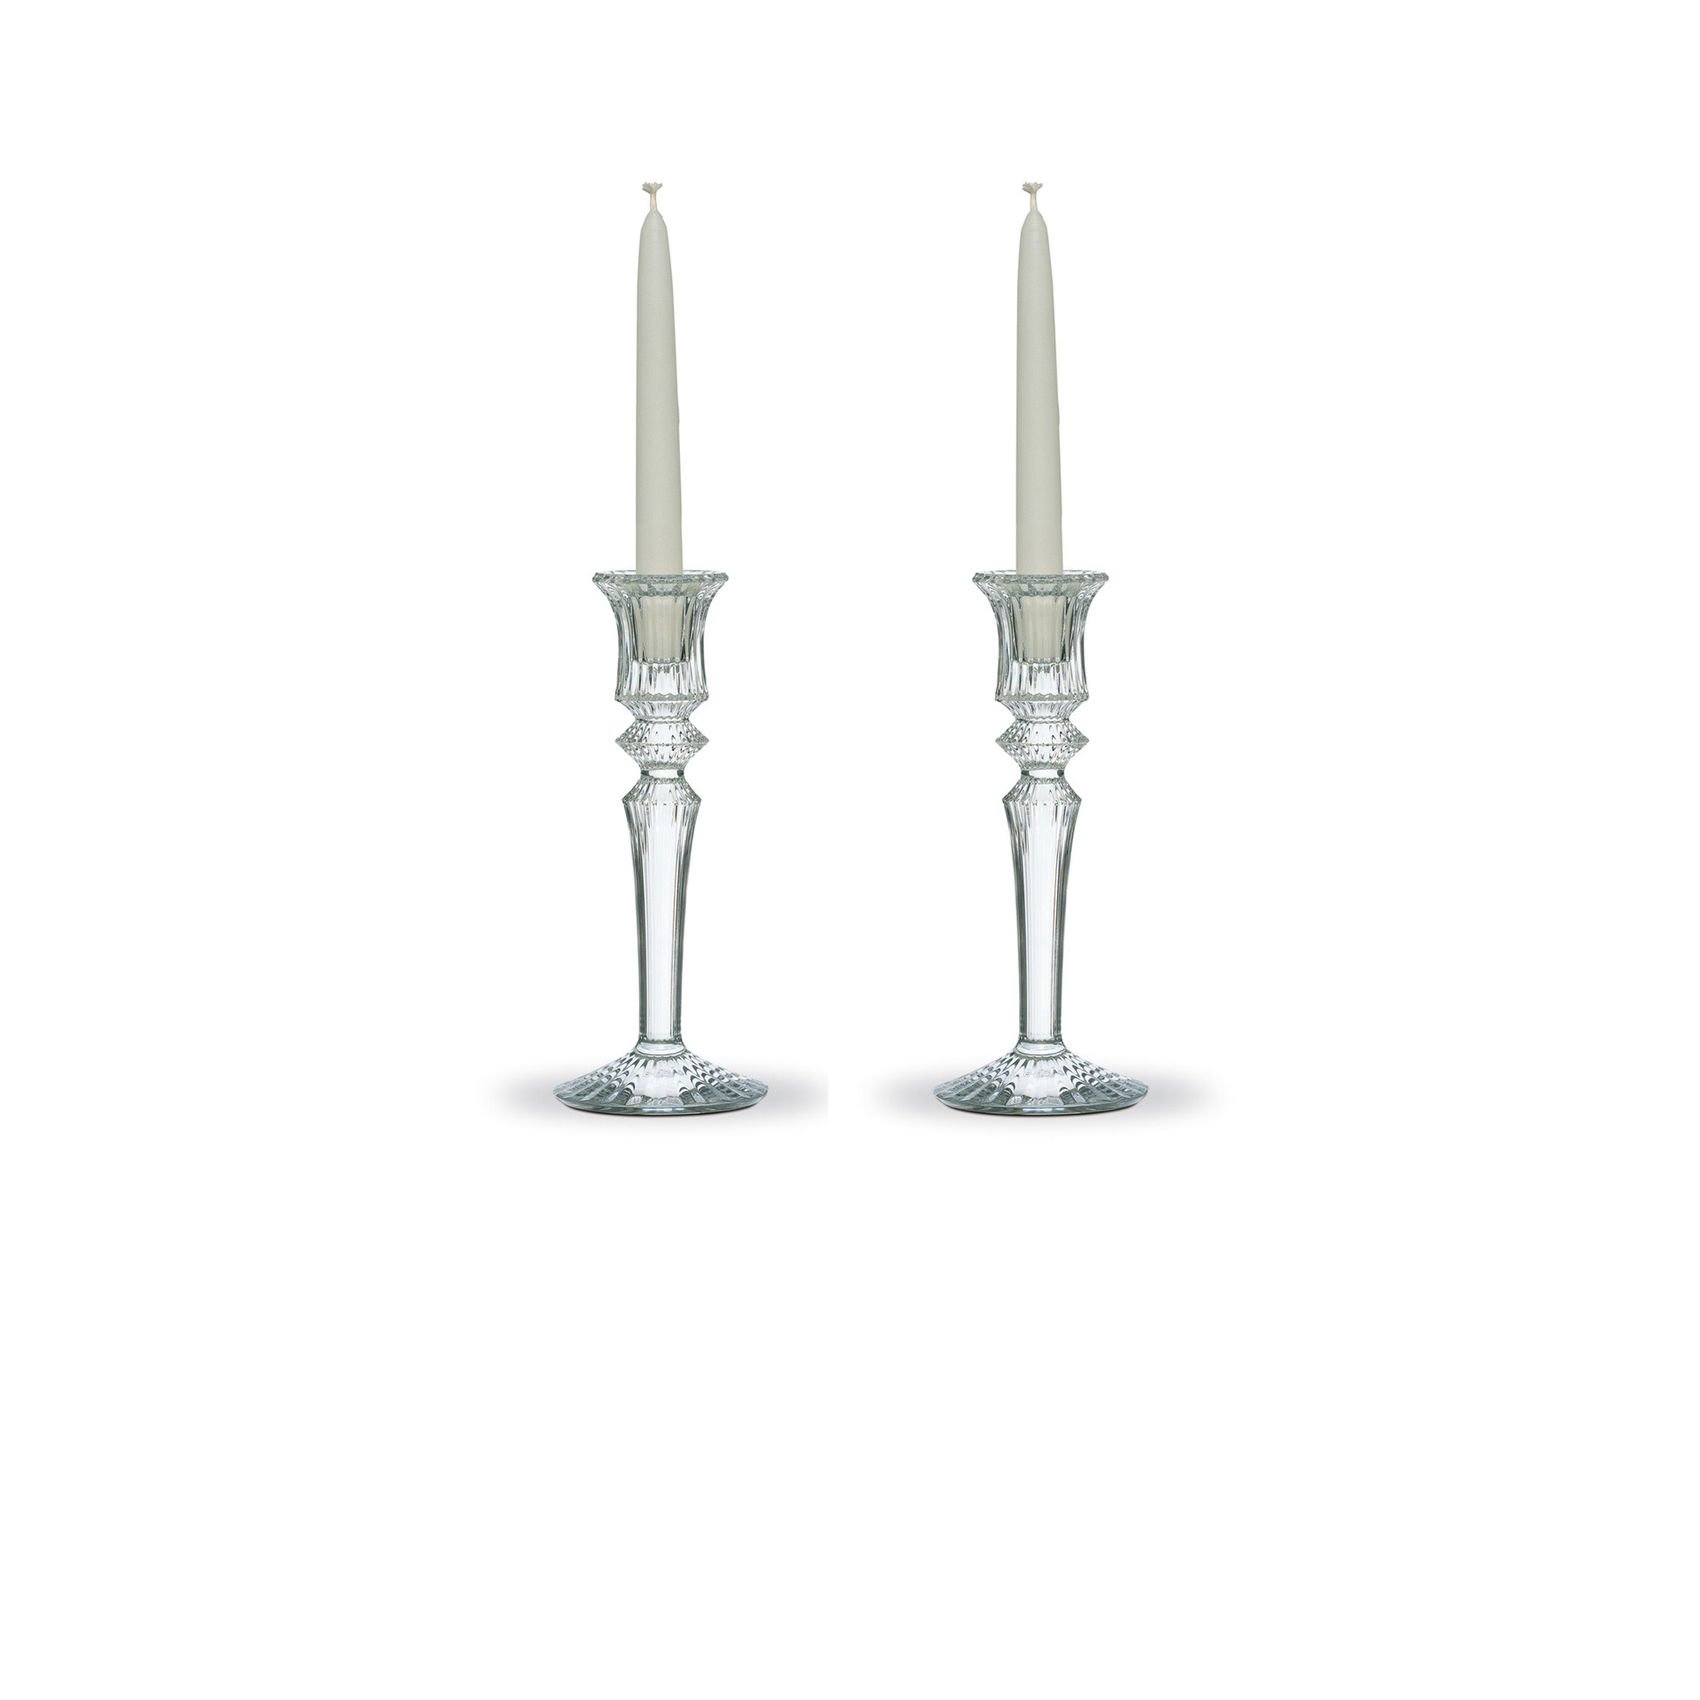 Set 2 candlestick 1 flame Baccarat Mille Nuits  2600553